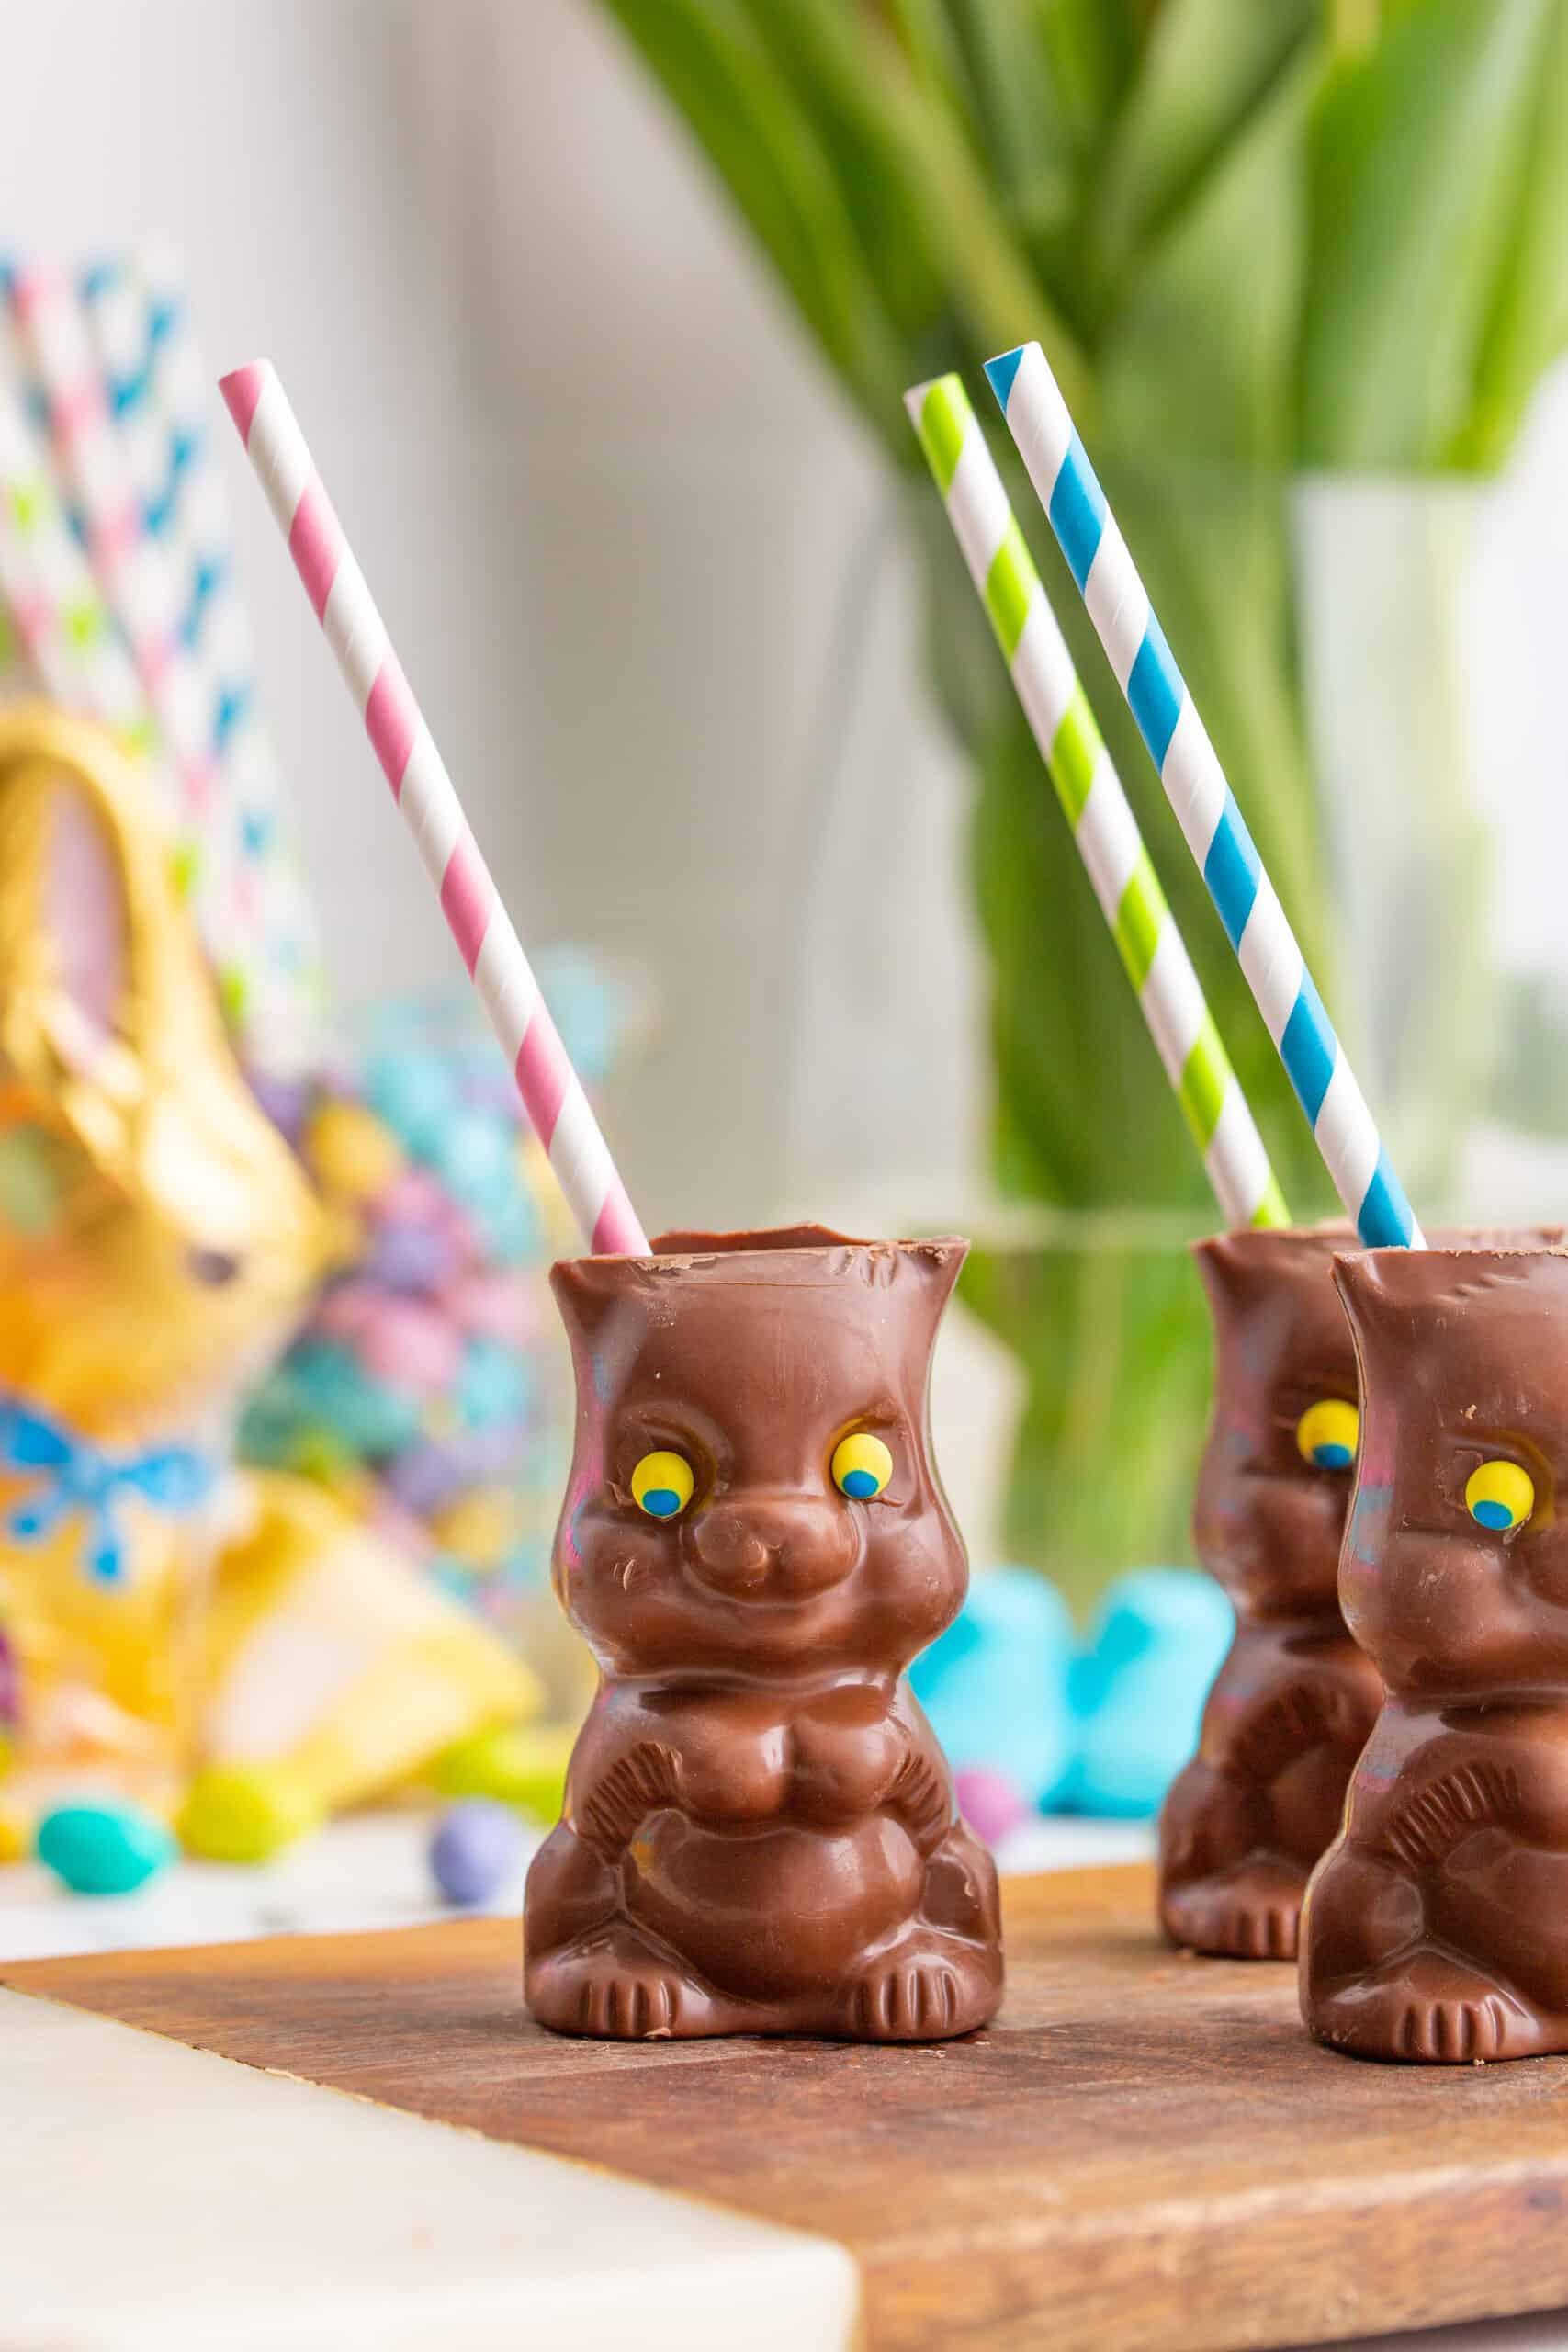 What To Do with Chocolate Bunnies: Chocolate Bunny Cups (great for a chocolate bunny cocktail)